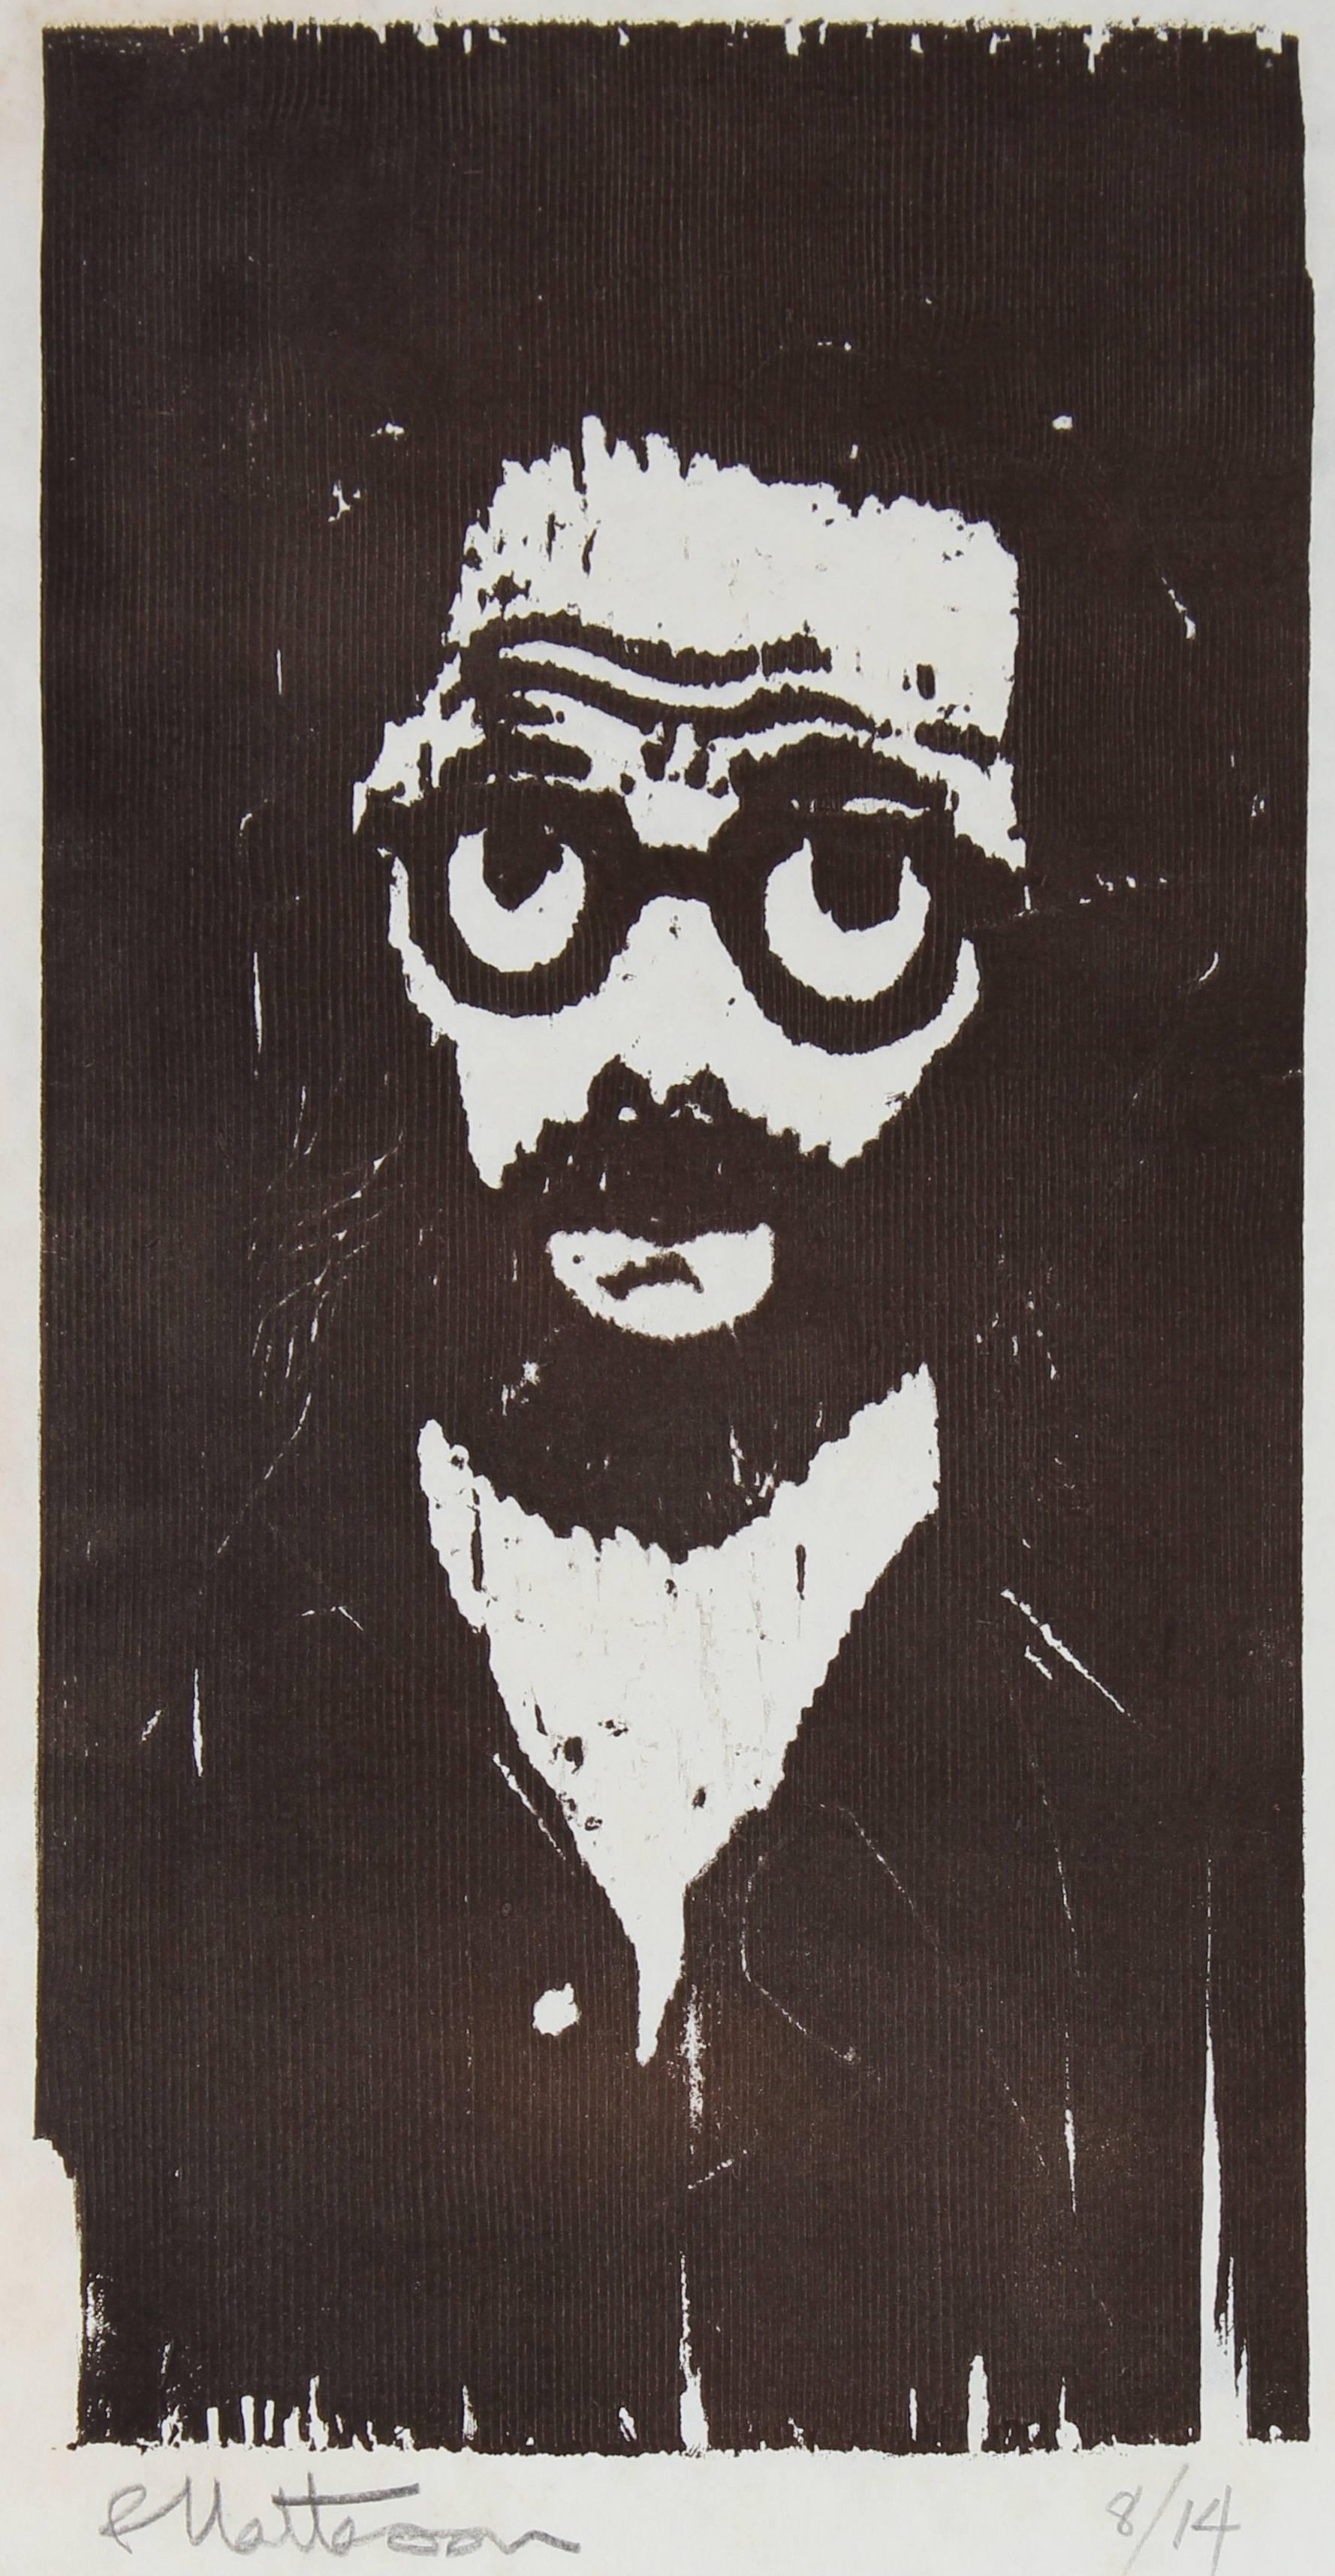 Rip Matteson Portrait Print - Woodcut Self-Portrait of The Artist with Glasses and Beard, Circa 1970s